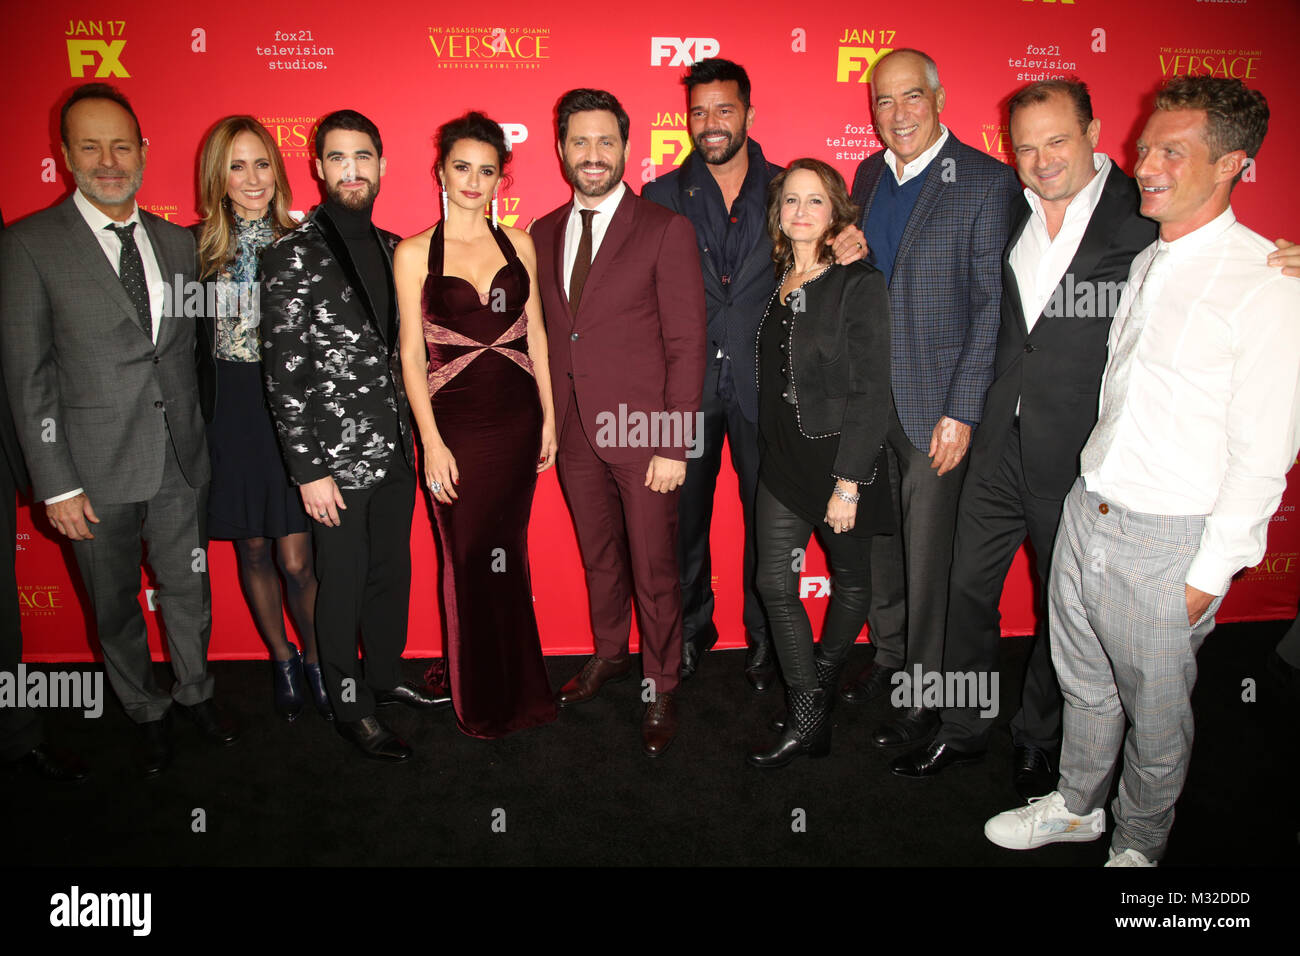 Celebrities attend FX’s 'The Assassination of Gianni Versace: American Crime Story' Premiere at ArcLight Hollywood.  Featuring: Peter Rice, John Landgraf, Dana Walden, Darren Criss, Penelope Cruz, Edgar Ramirez, Ricky Martin, Nina Jacobson and Gary Newman Where: Los Angeles, California, United States When: 09 Jan 2018 Credit: Brian To/WENN.com Stock Photo